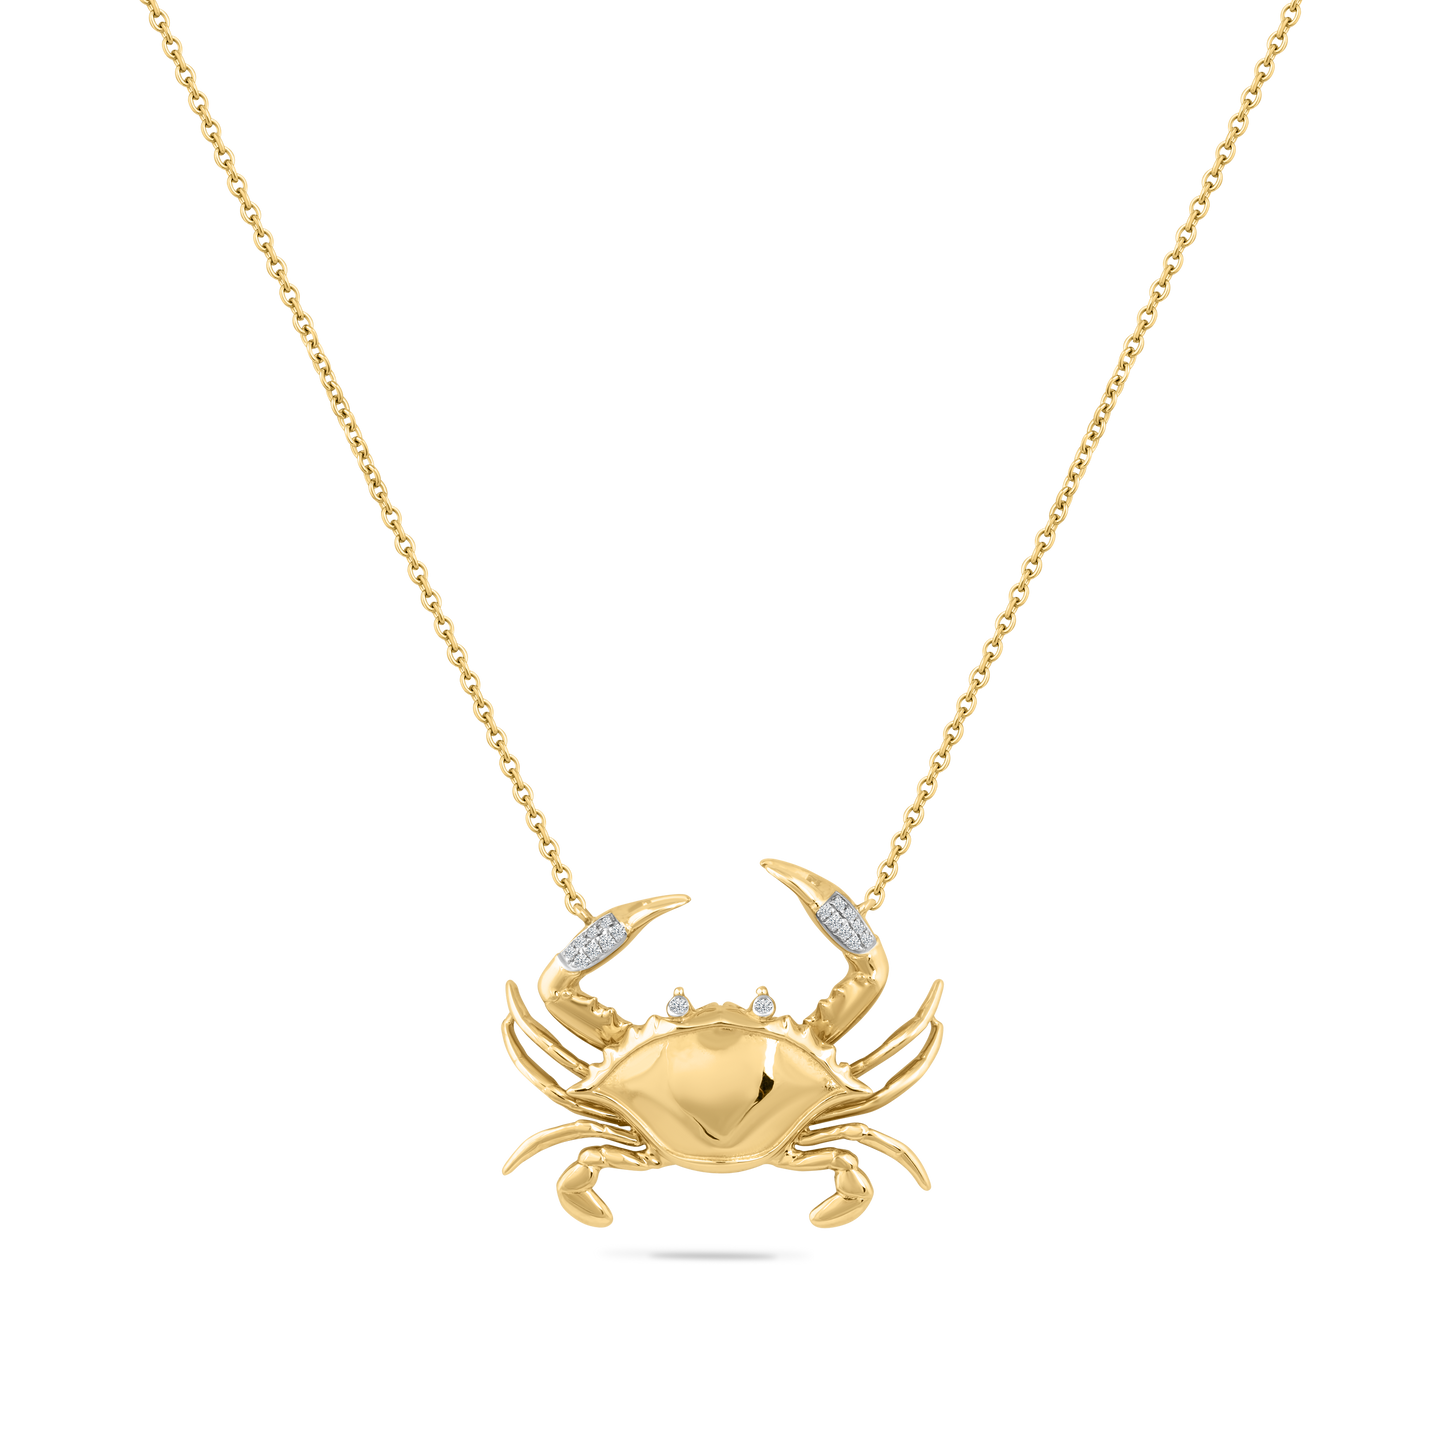 14K MARYLAND CRAB NECKLACE WITH 18 DIAMONDS 0.06CT ON 18 INCHES CABLE CHAIN